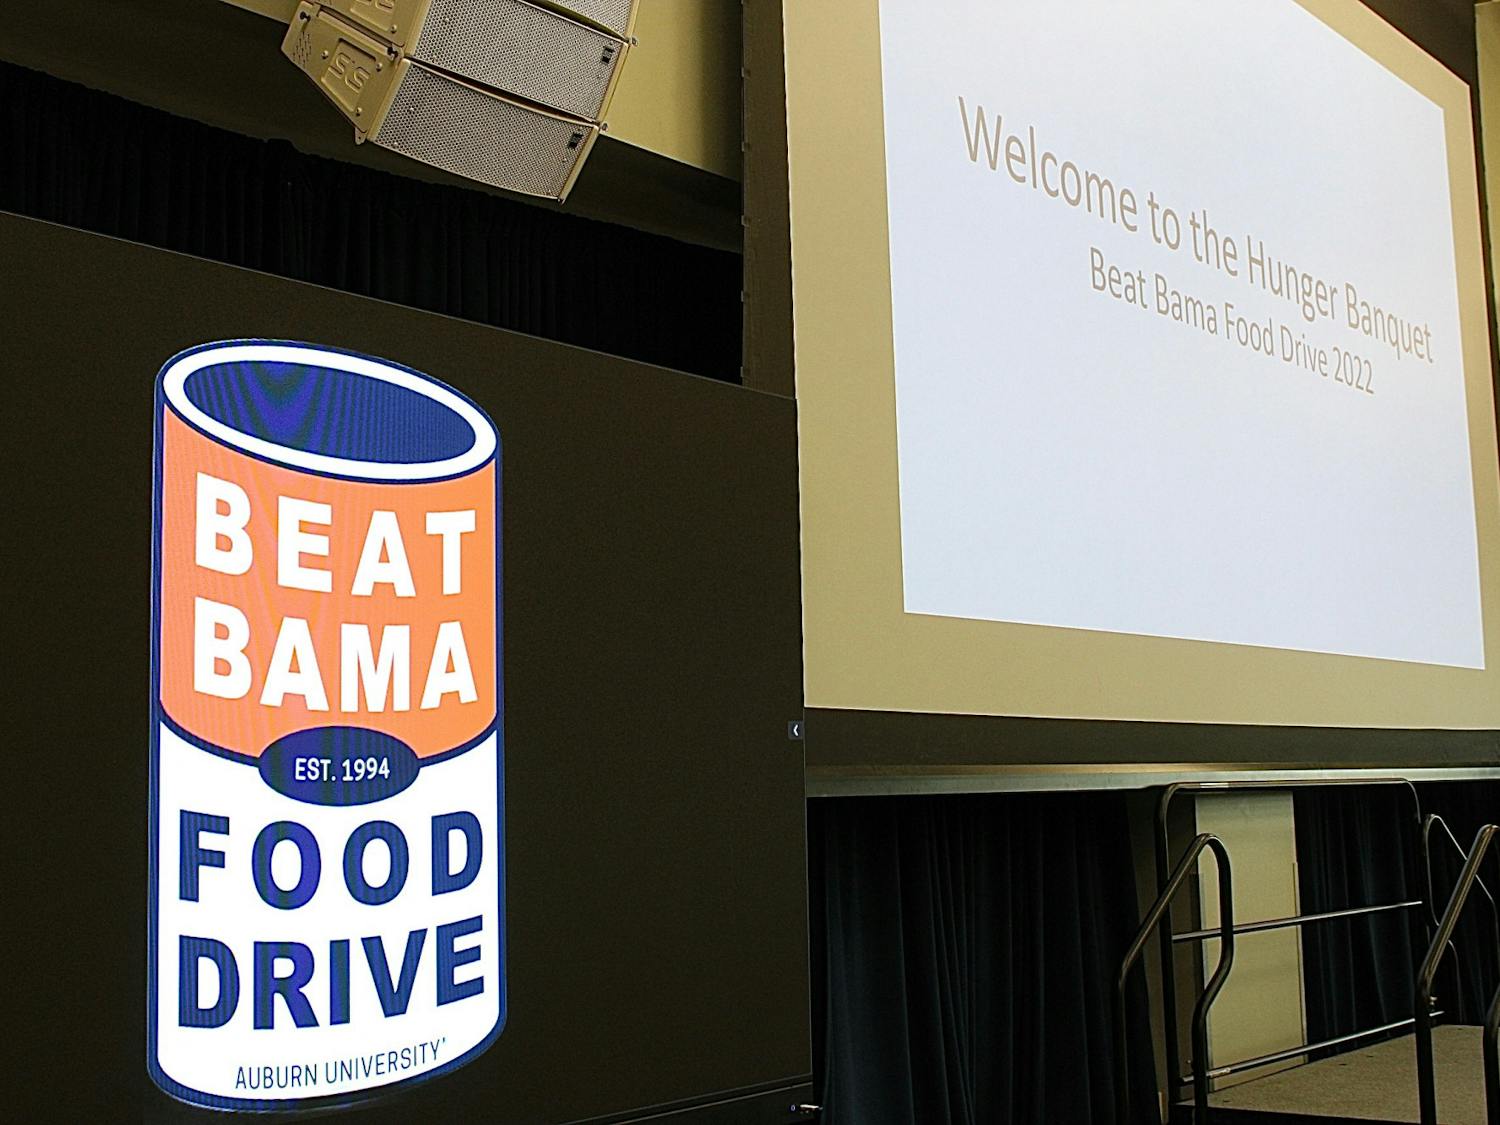 The 29th annual Beat Bama Food Drive holds banquet September, 27.